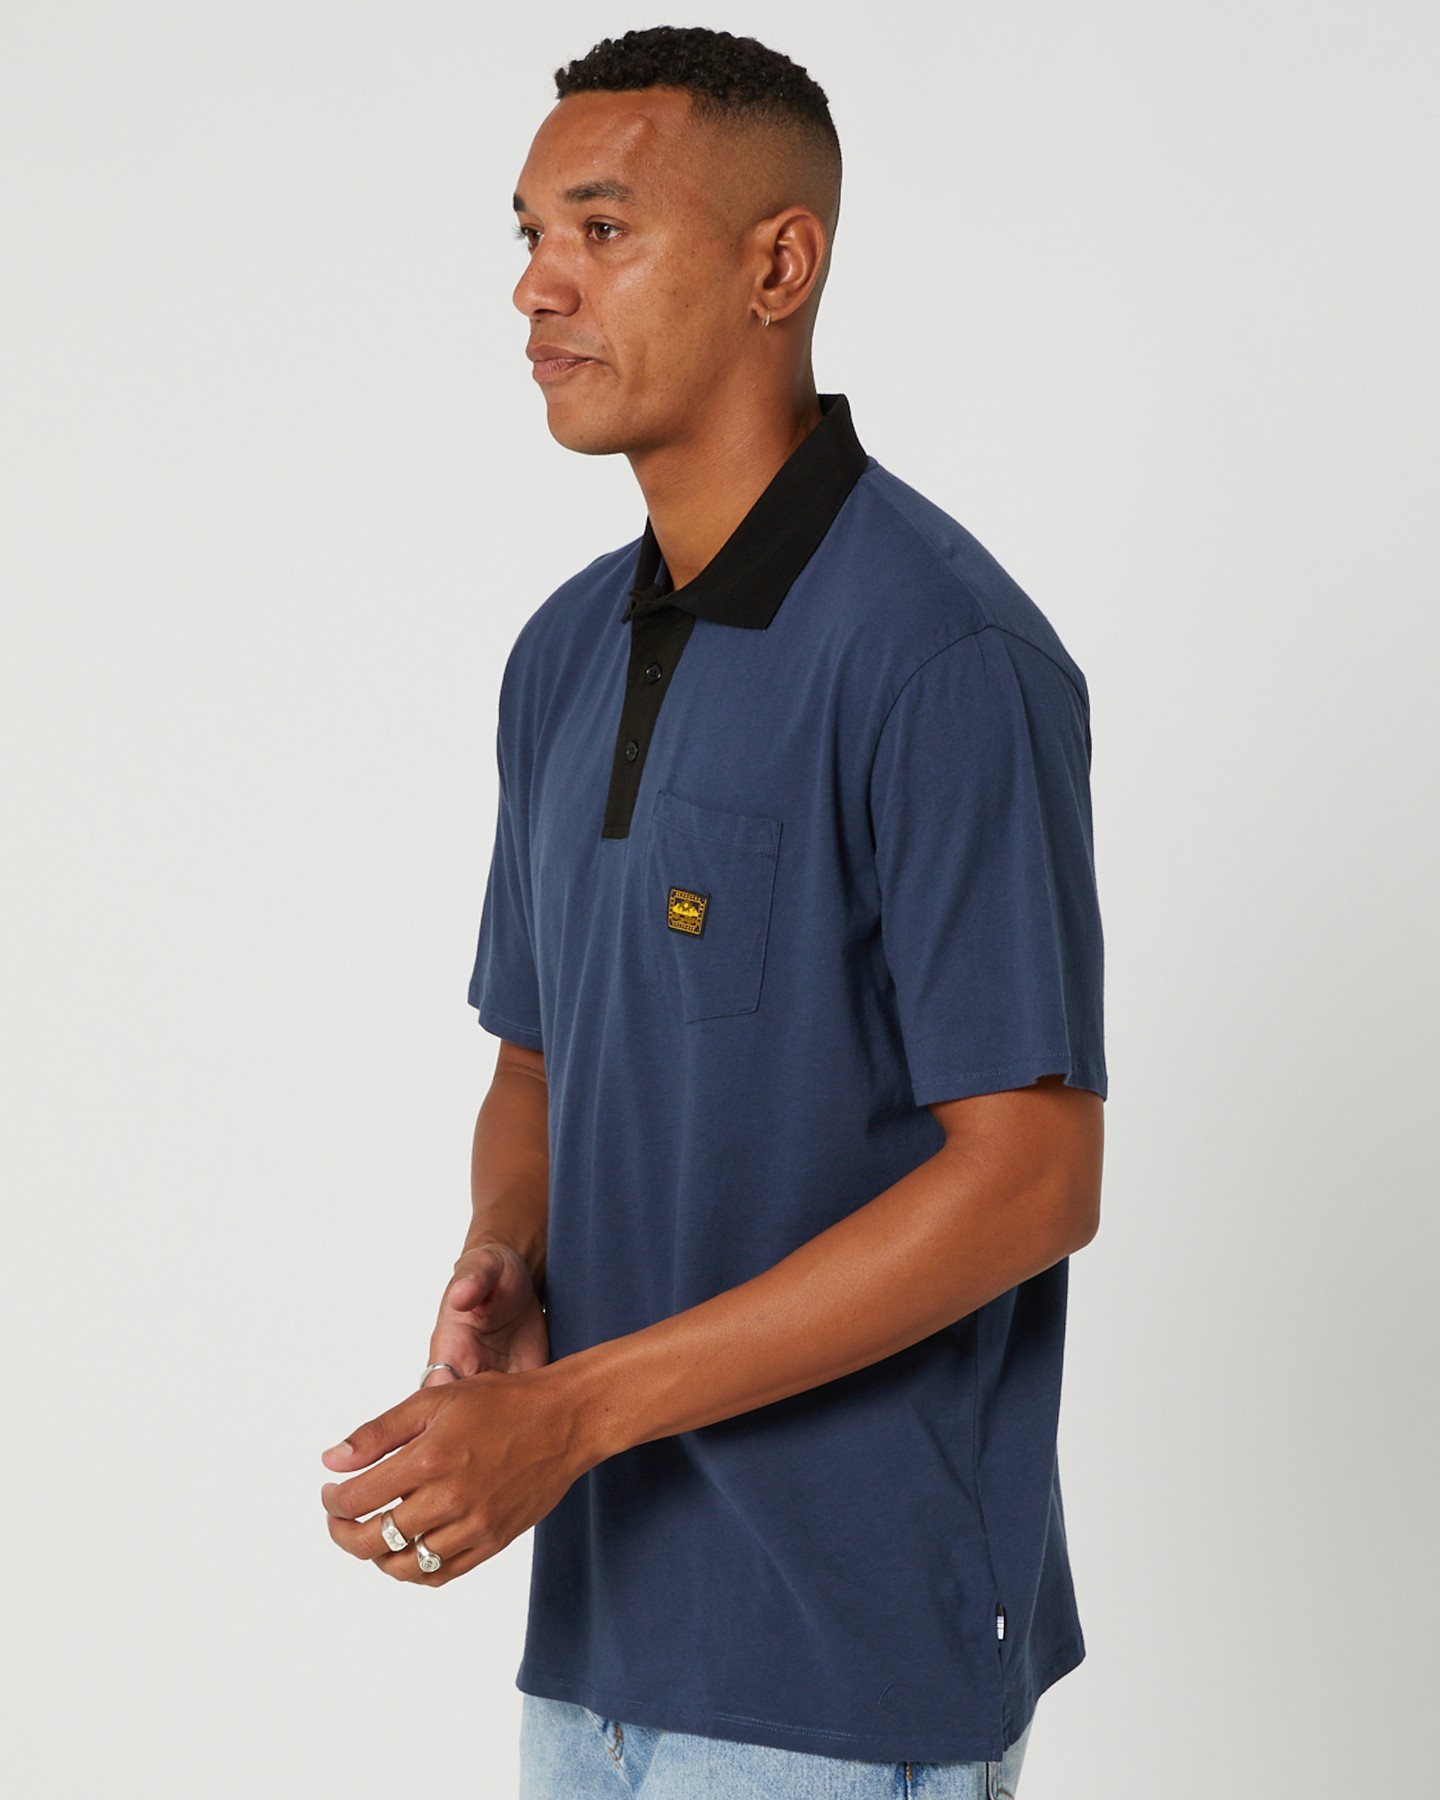 Depactus Cast Ss Polo - Navy Steel | SurfStitch